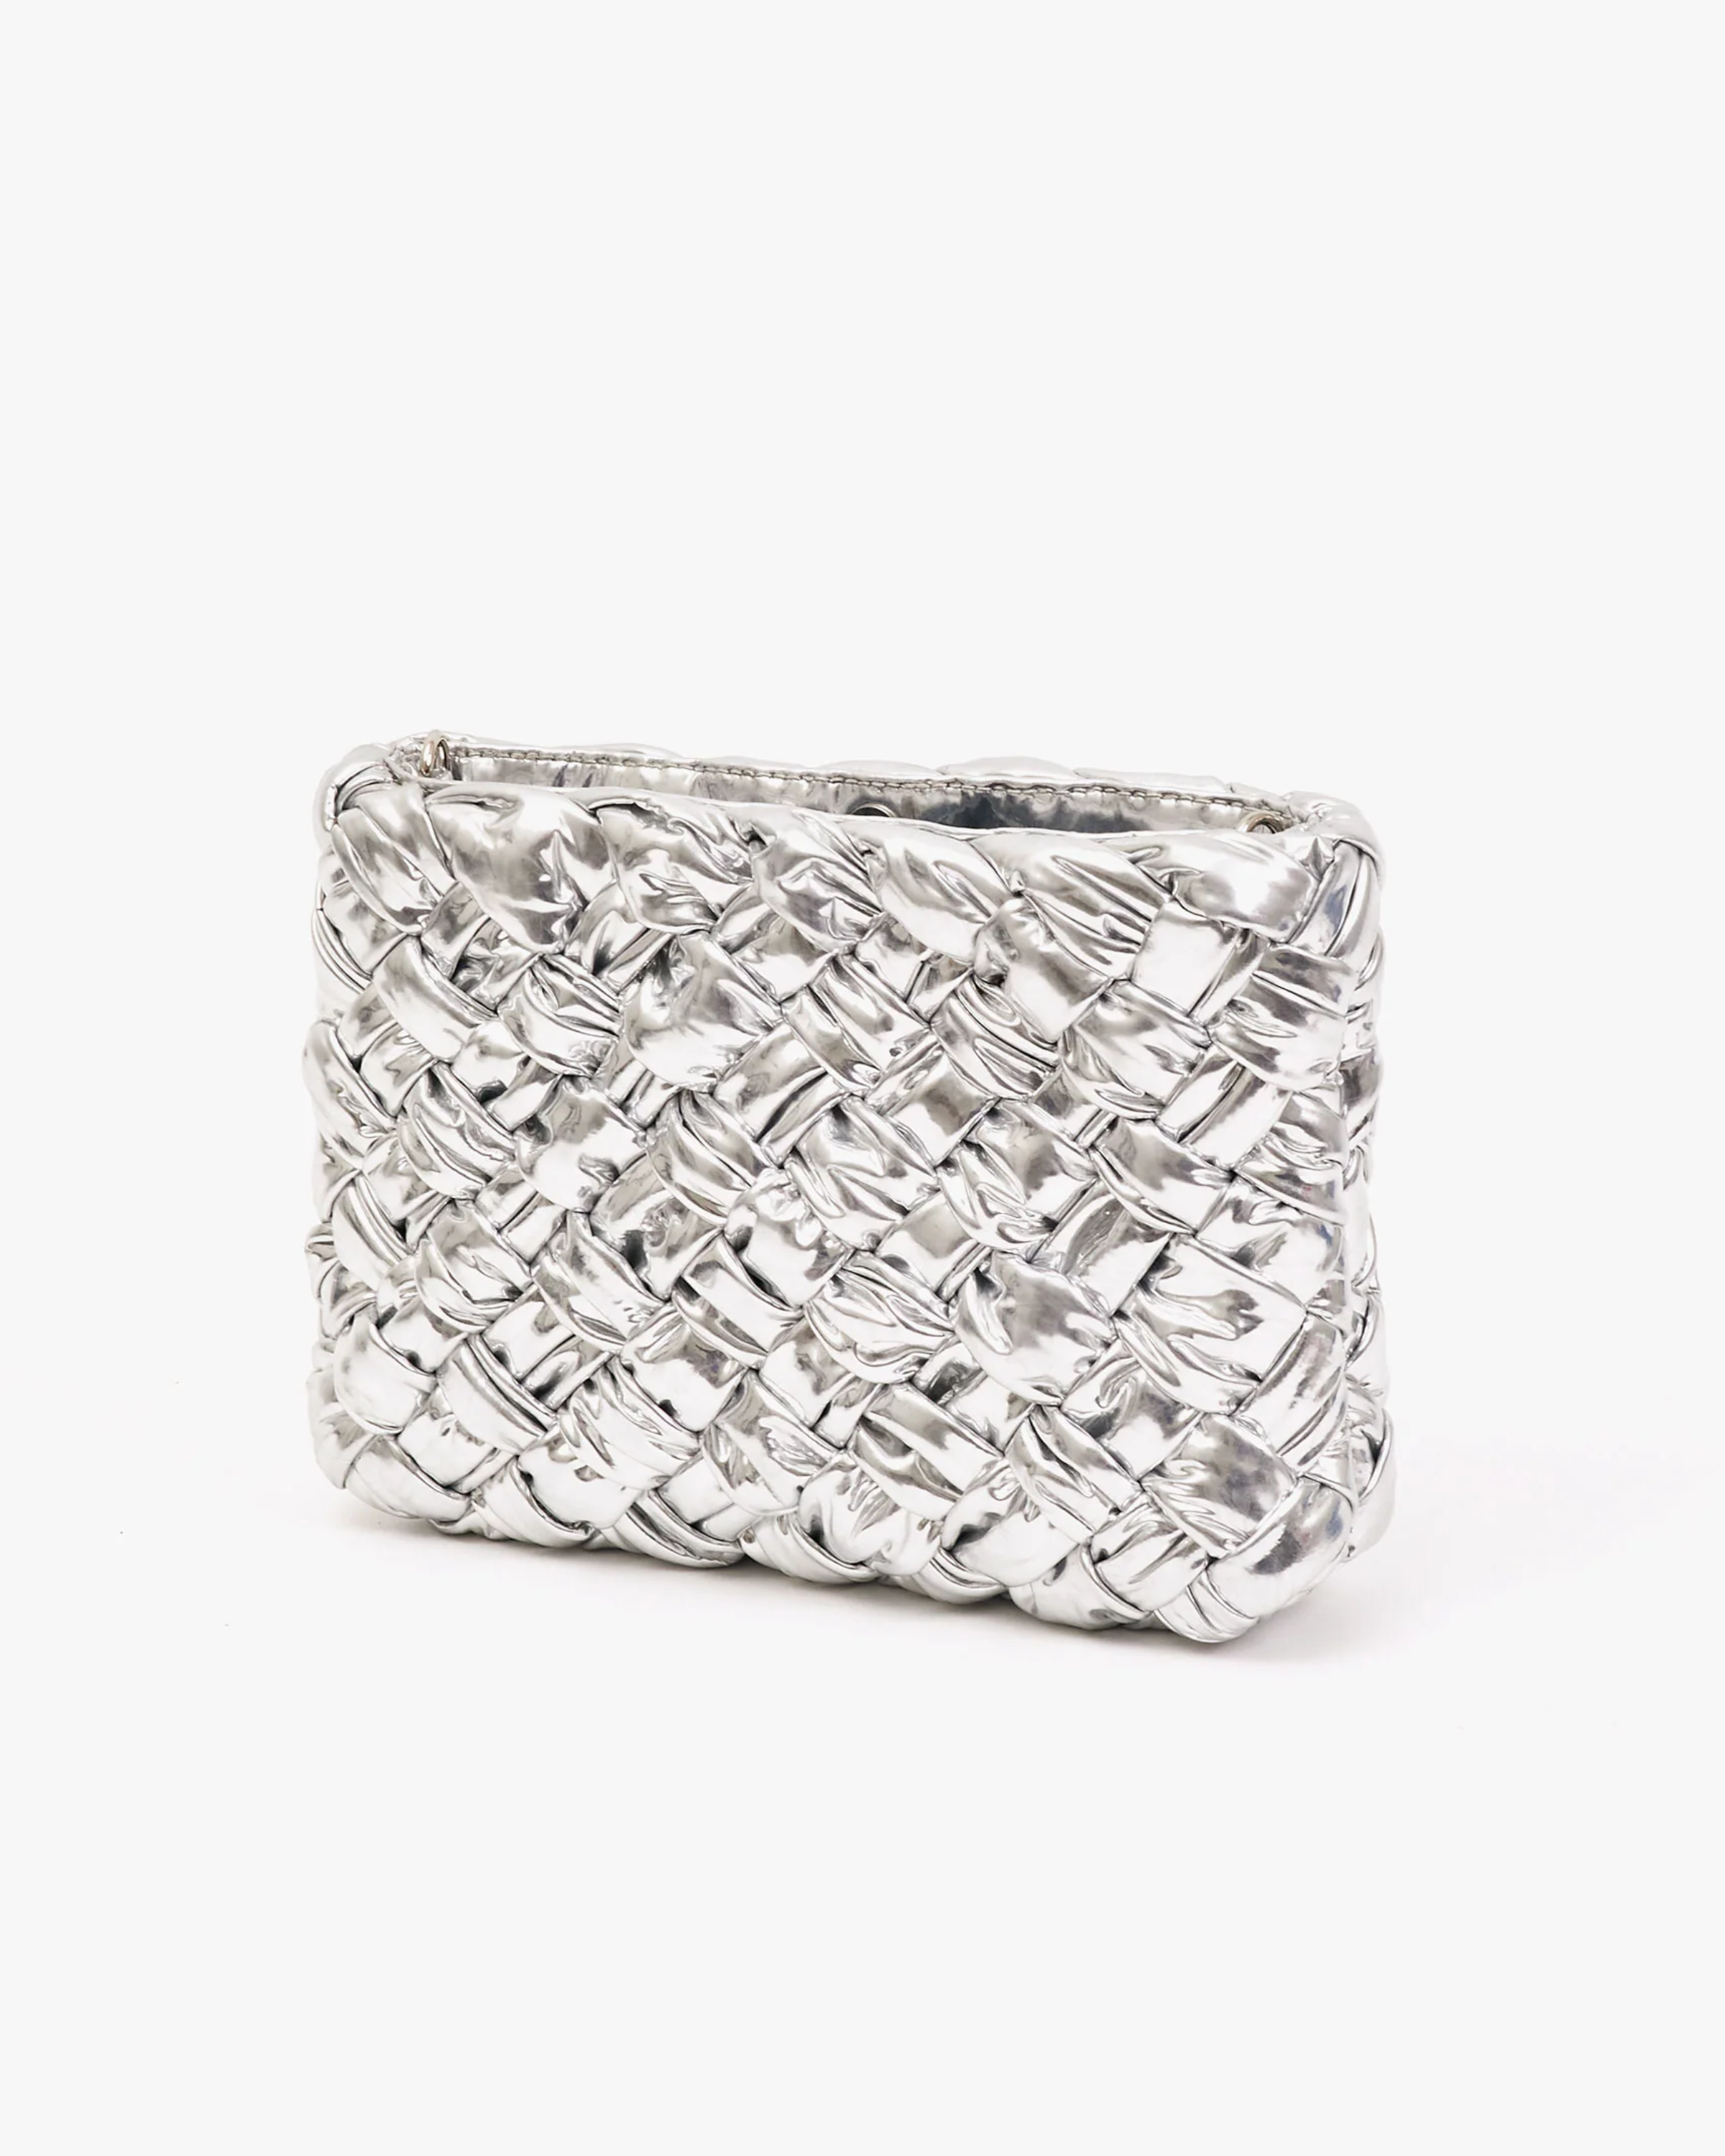 Clare V. Estelle Bag in Puffy Woven Silver